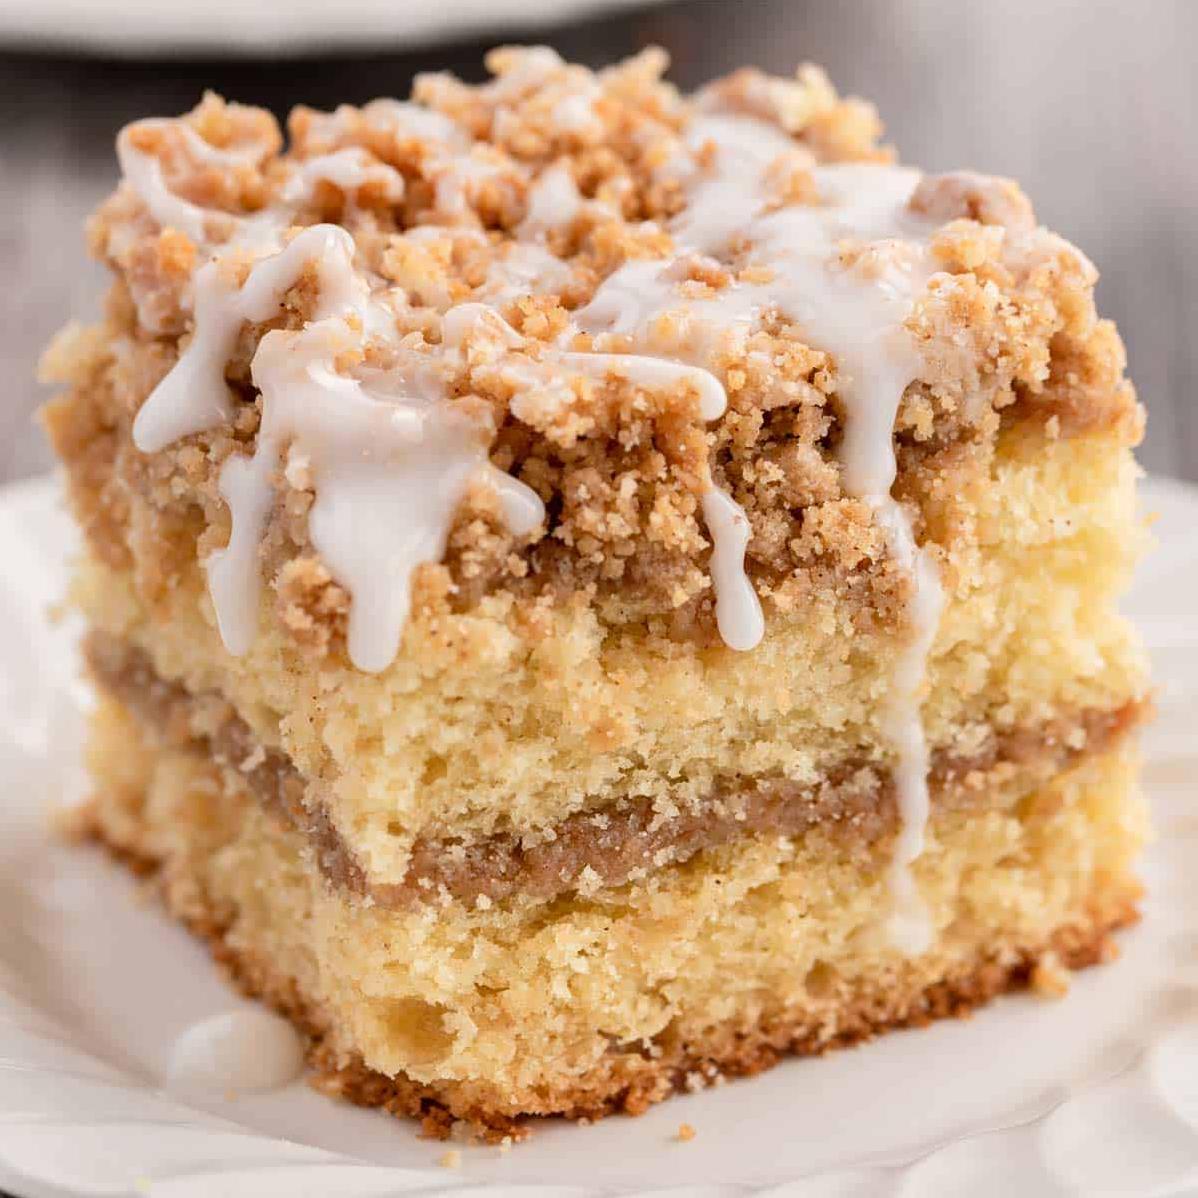  Your kitchen will smell heavenly while baking this irresistible coffee cake.